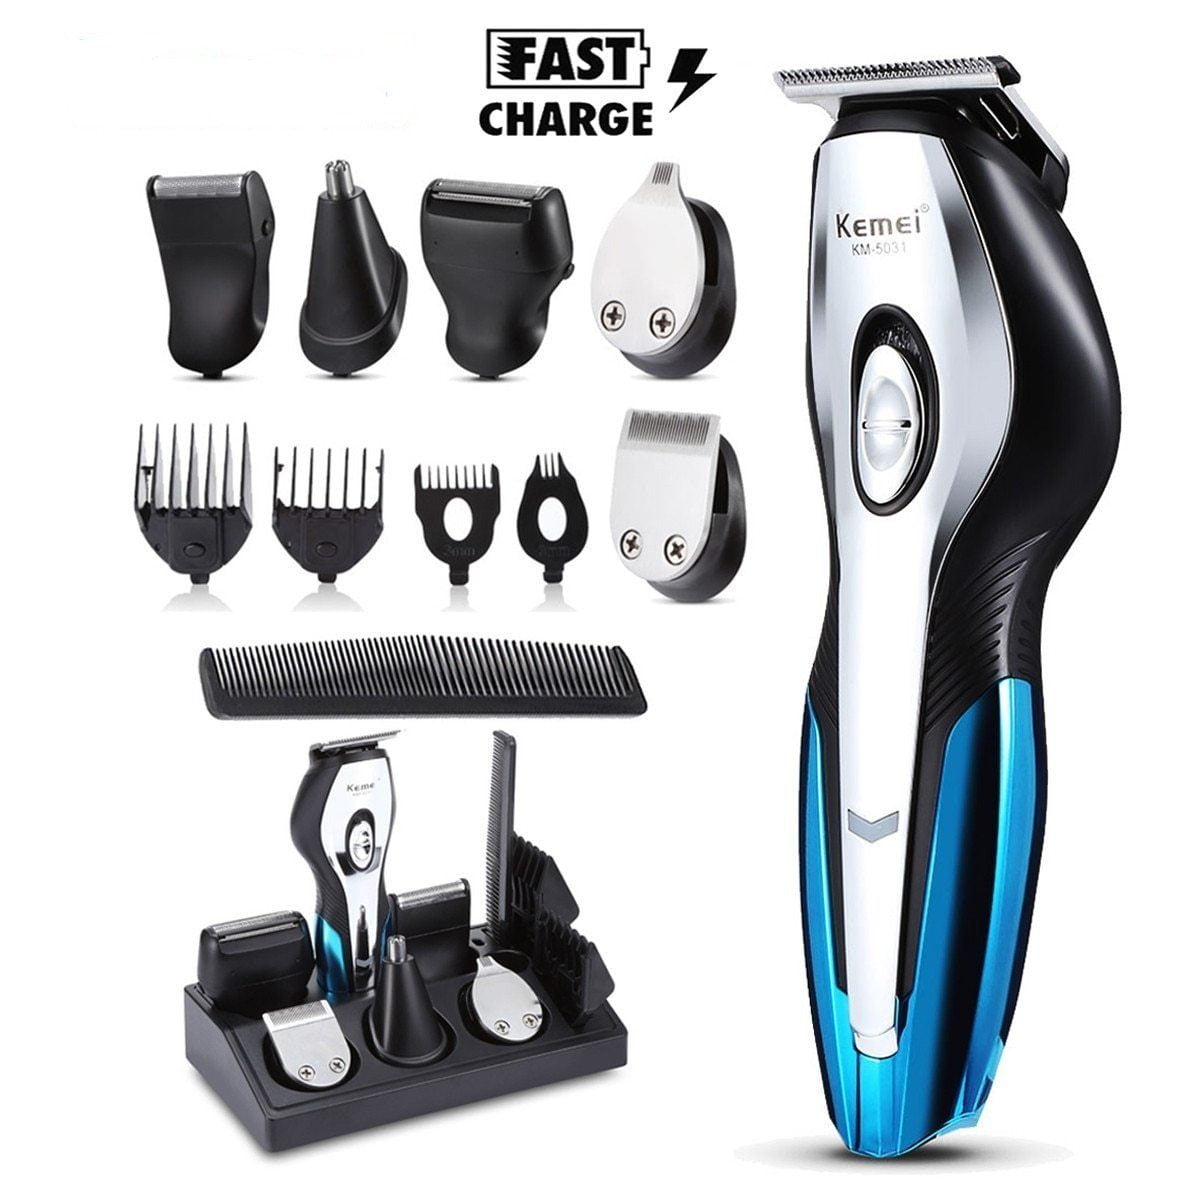 Electric Beard Trimmer Kit For Men, 11 in 1 Rechargeable Grooming Kit